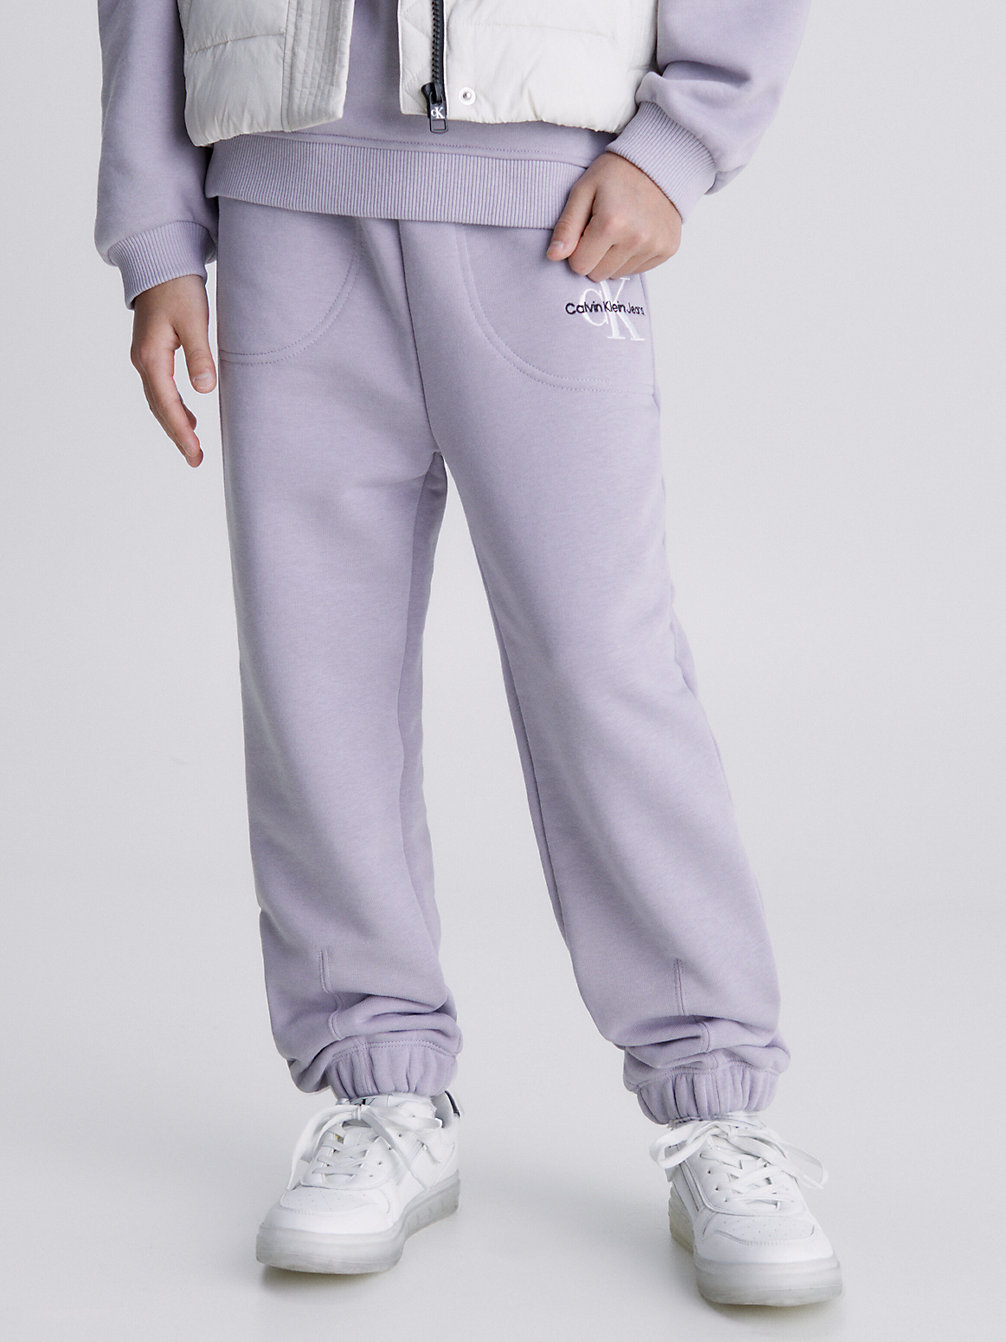 LAVENDER AURA Relaxed Organic Terry Joggers undefined girls Calvin Klein